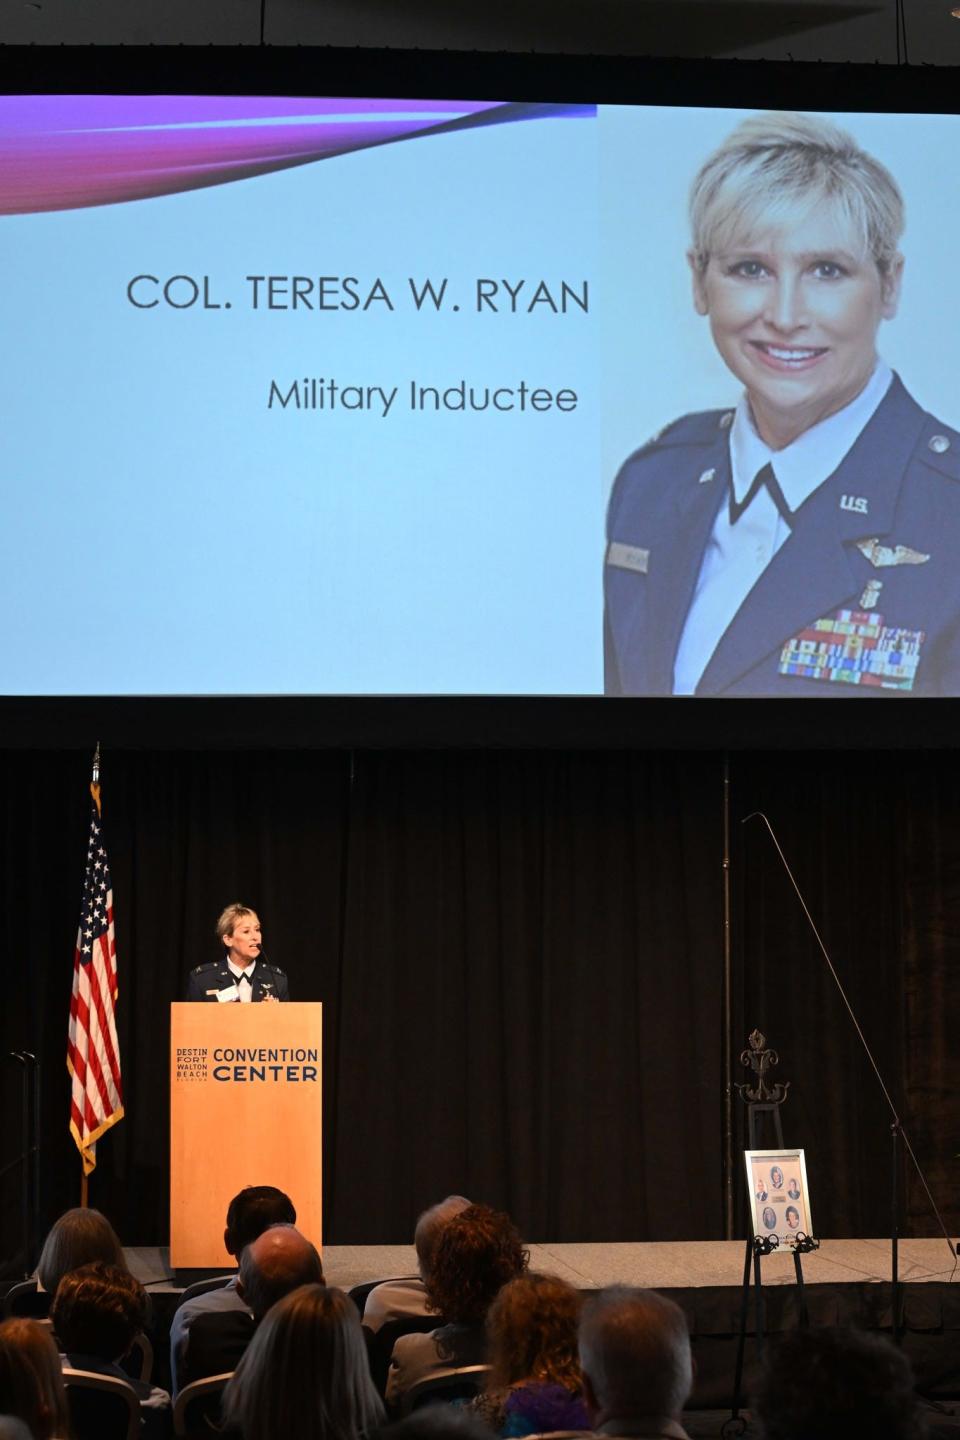 Retired Air Force Col. Teresa Ryan was a combat veteran who advanced women's health during her time in the military. She now teaches at the NWFSC School of Nursing.